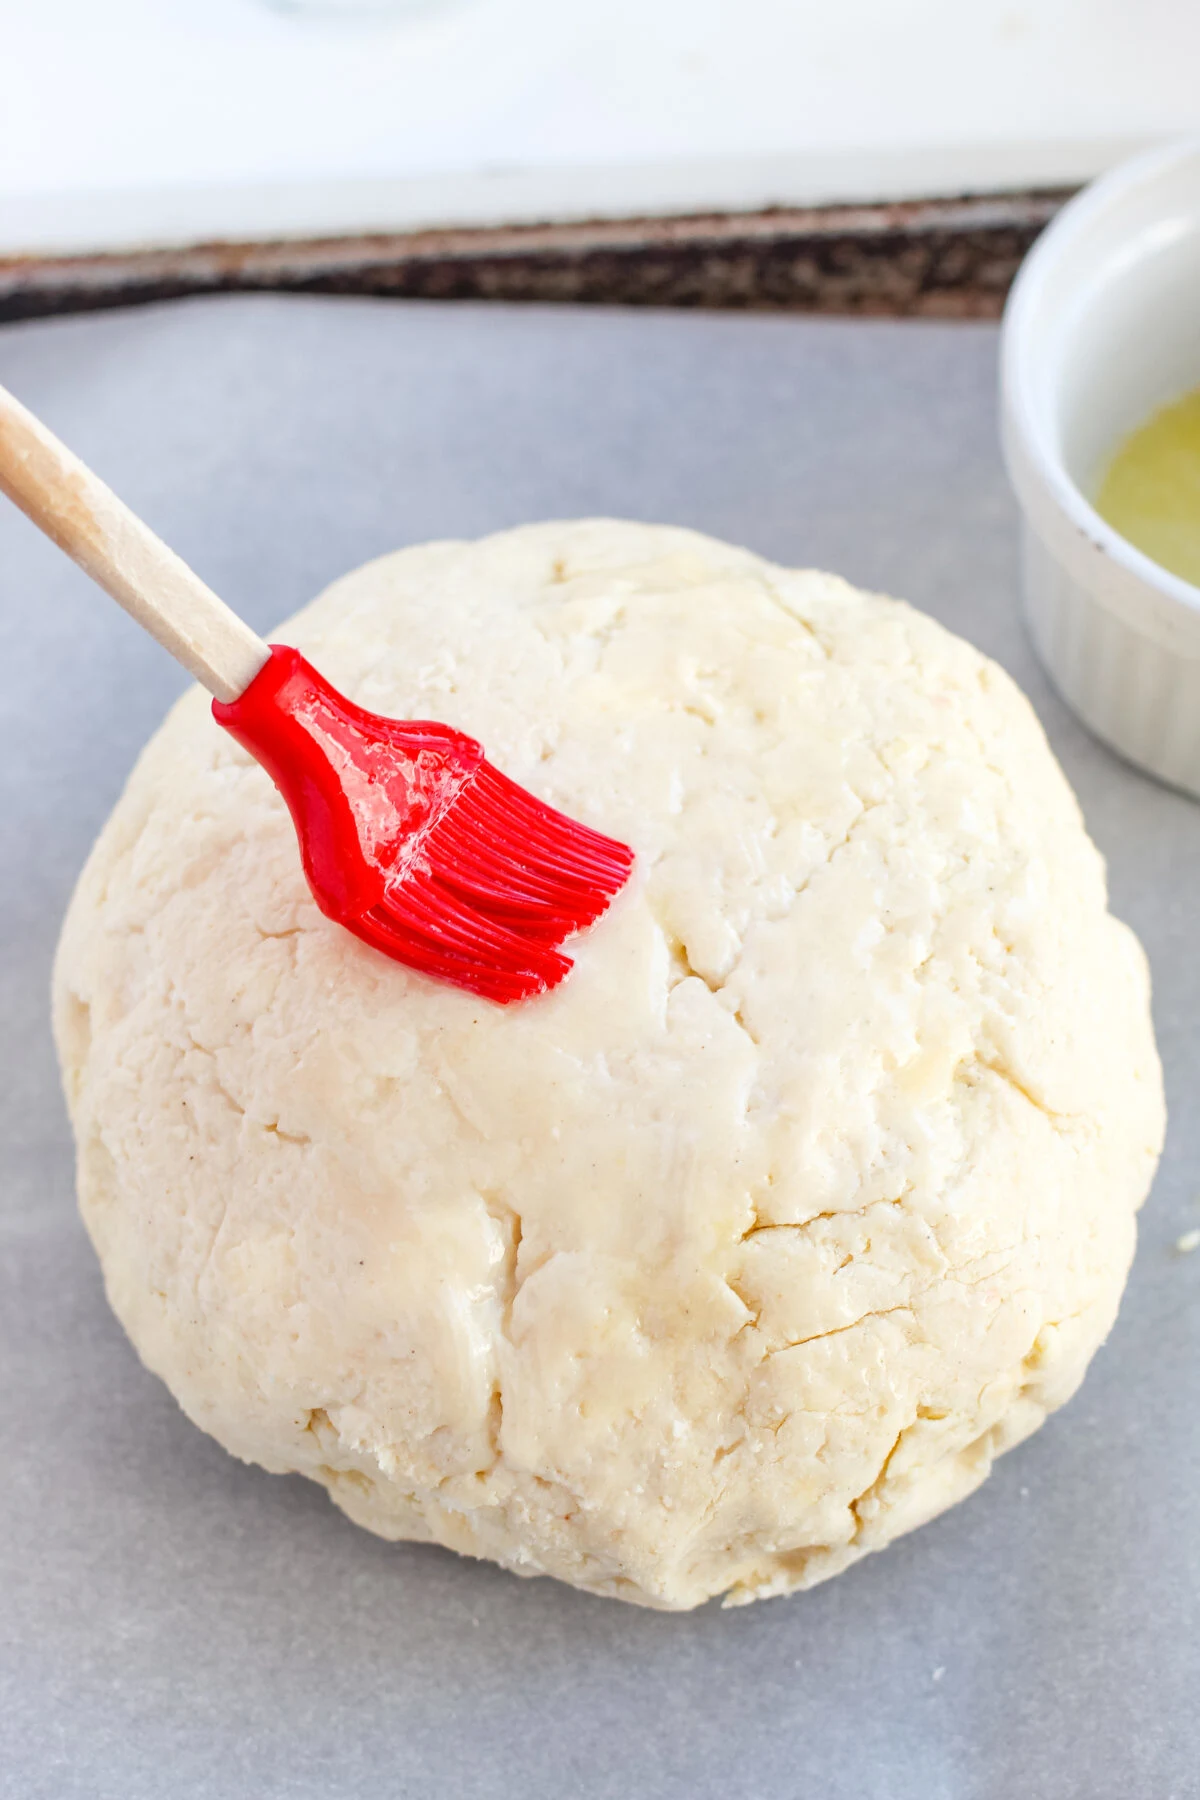 Dough ball being brushed over with melted butter.